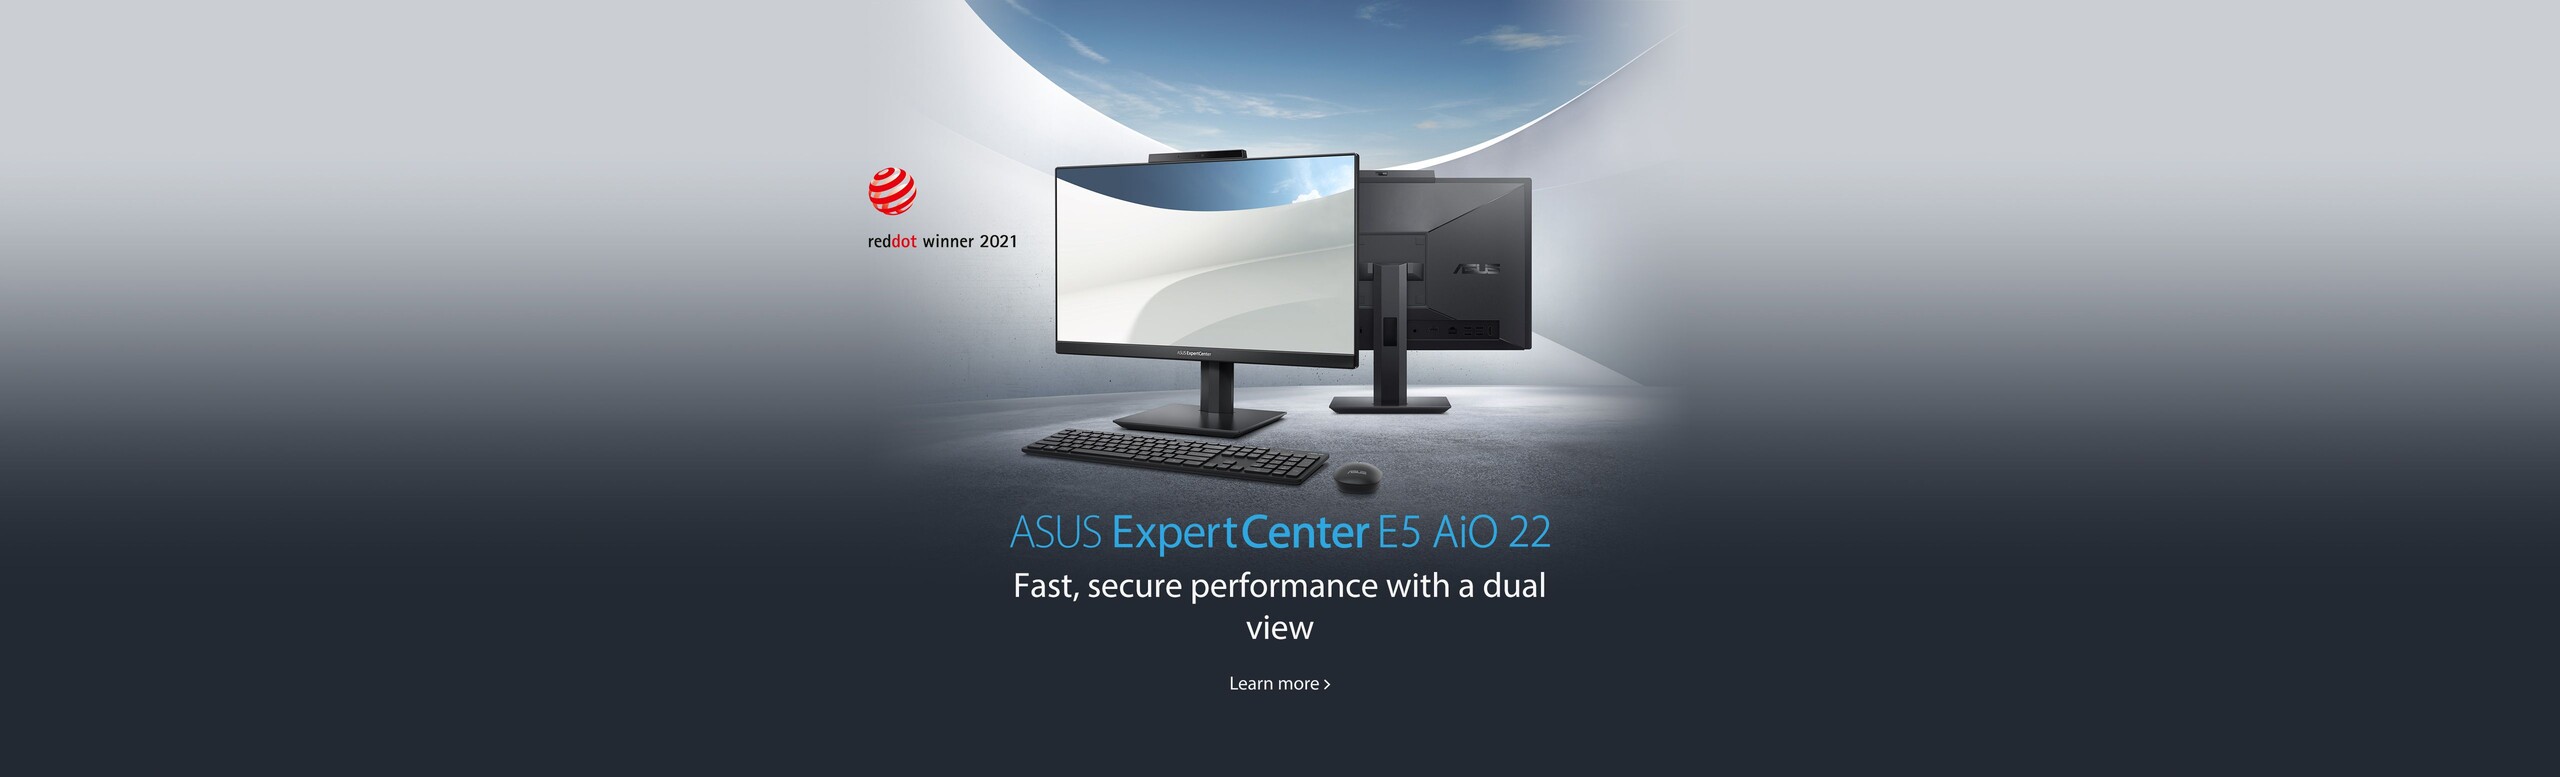 There are two ASUS ExpertCenter AiOs. One of the ASUS ExpertCenter AiO presents a screen with wallpaper in the front with an ASUS wireless keyboard and an ASUS wireless mouse. The other ASUS ExpertCenter AiO presents a customer-facing second screen on the back.